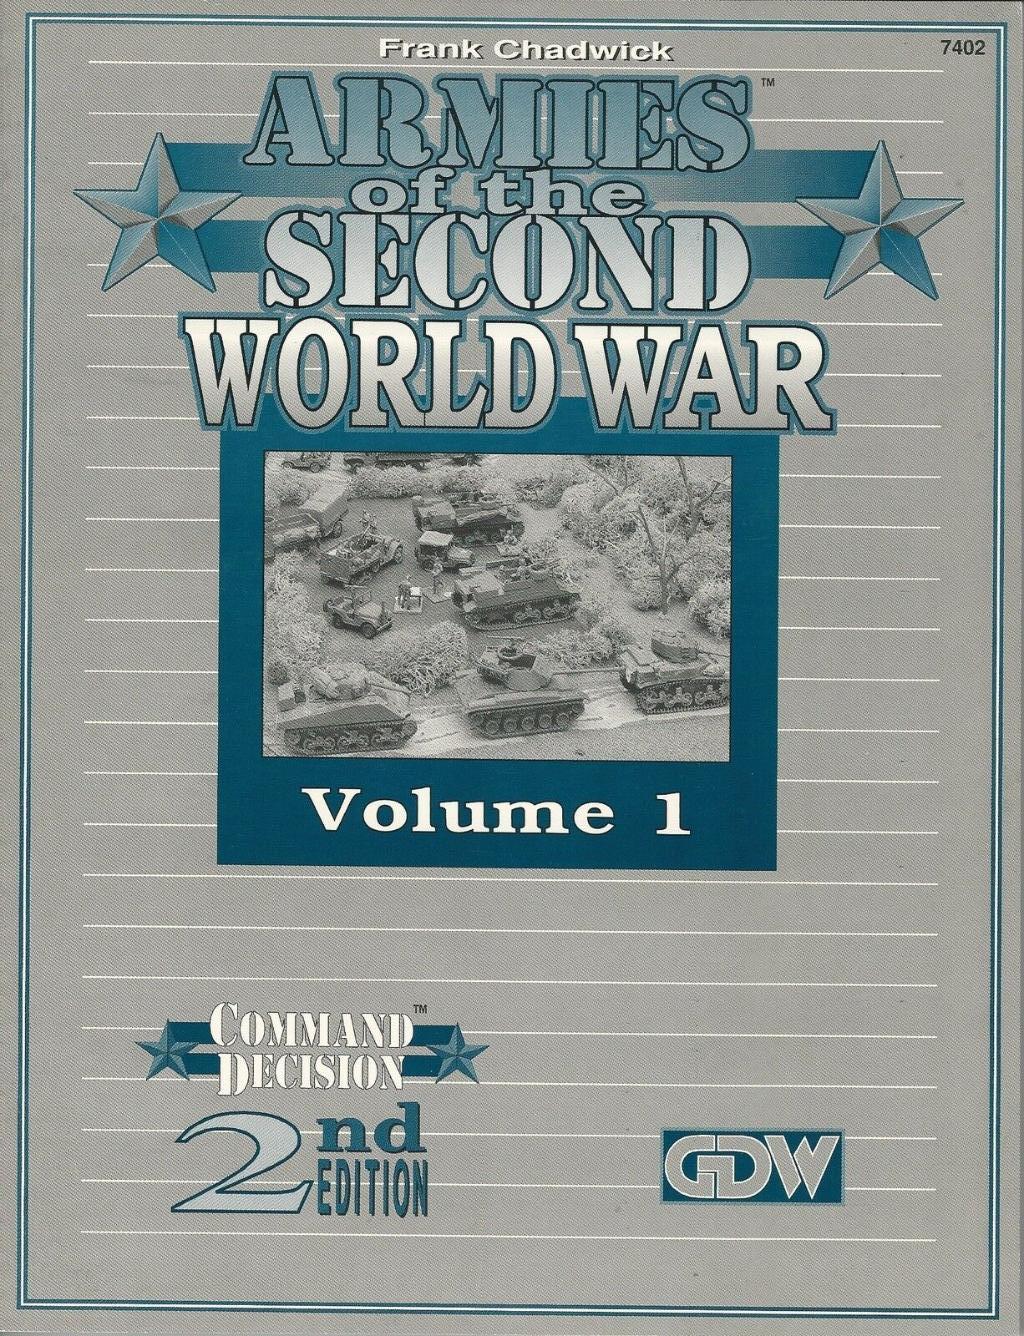 Command Decision Ii - Armies Of The Second World War, Volume I